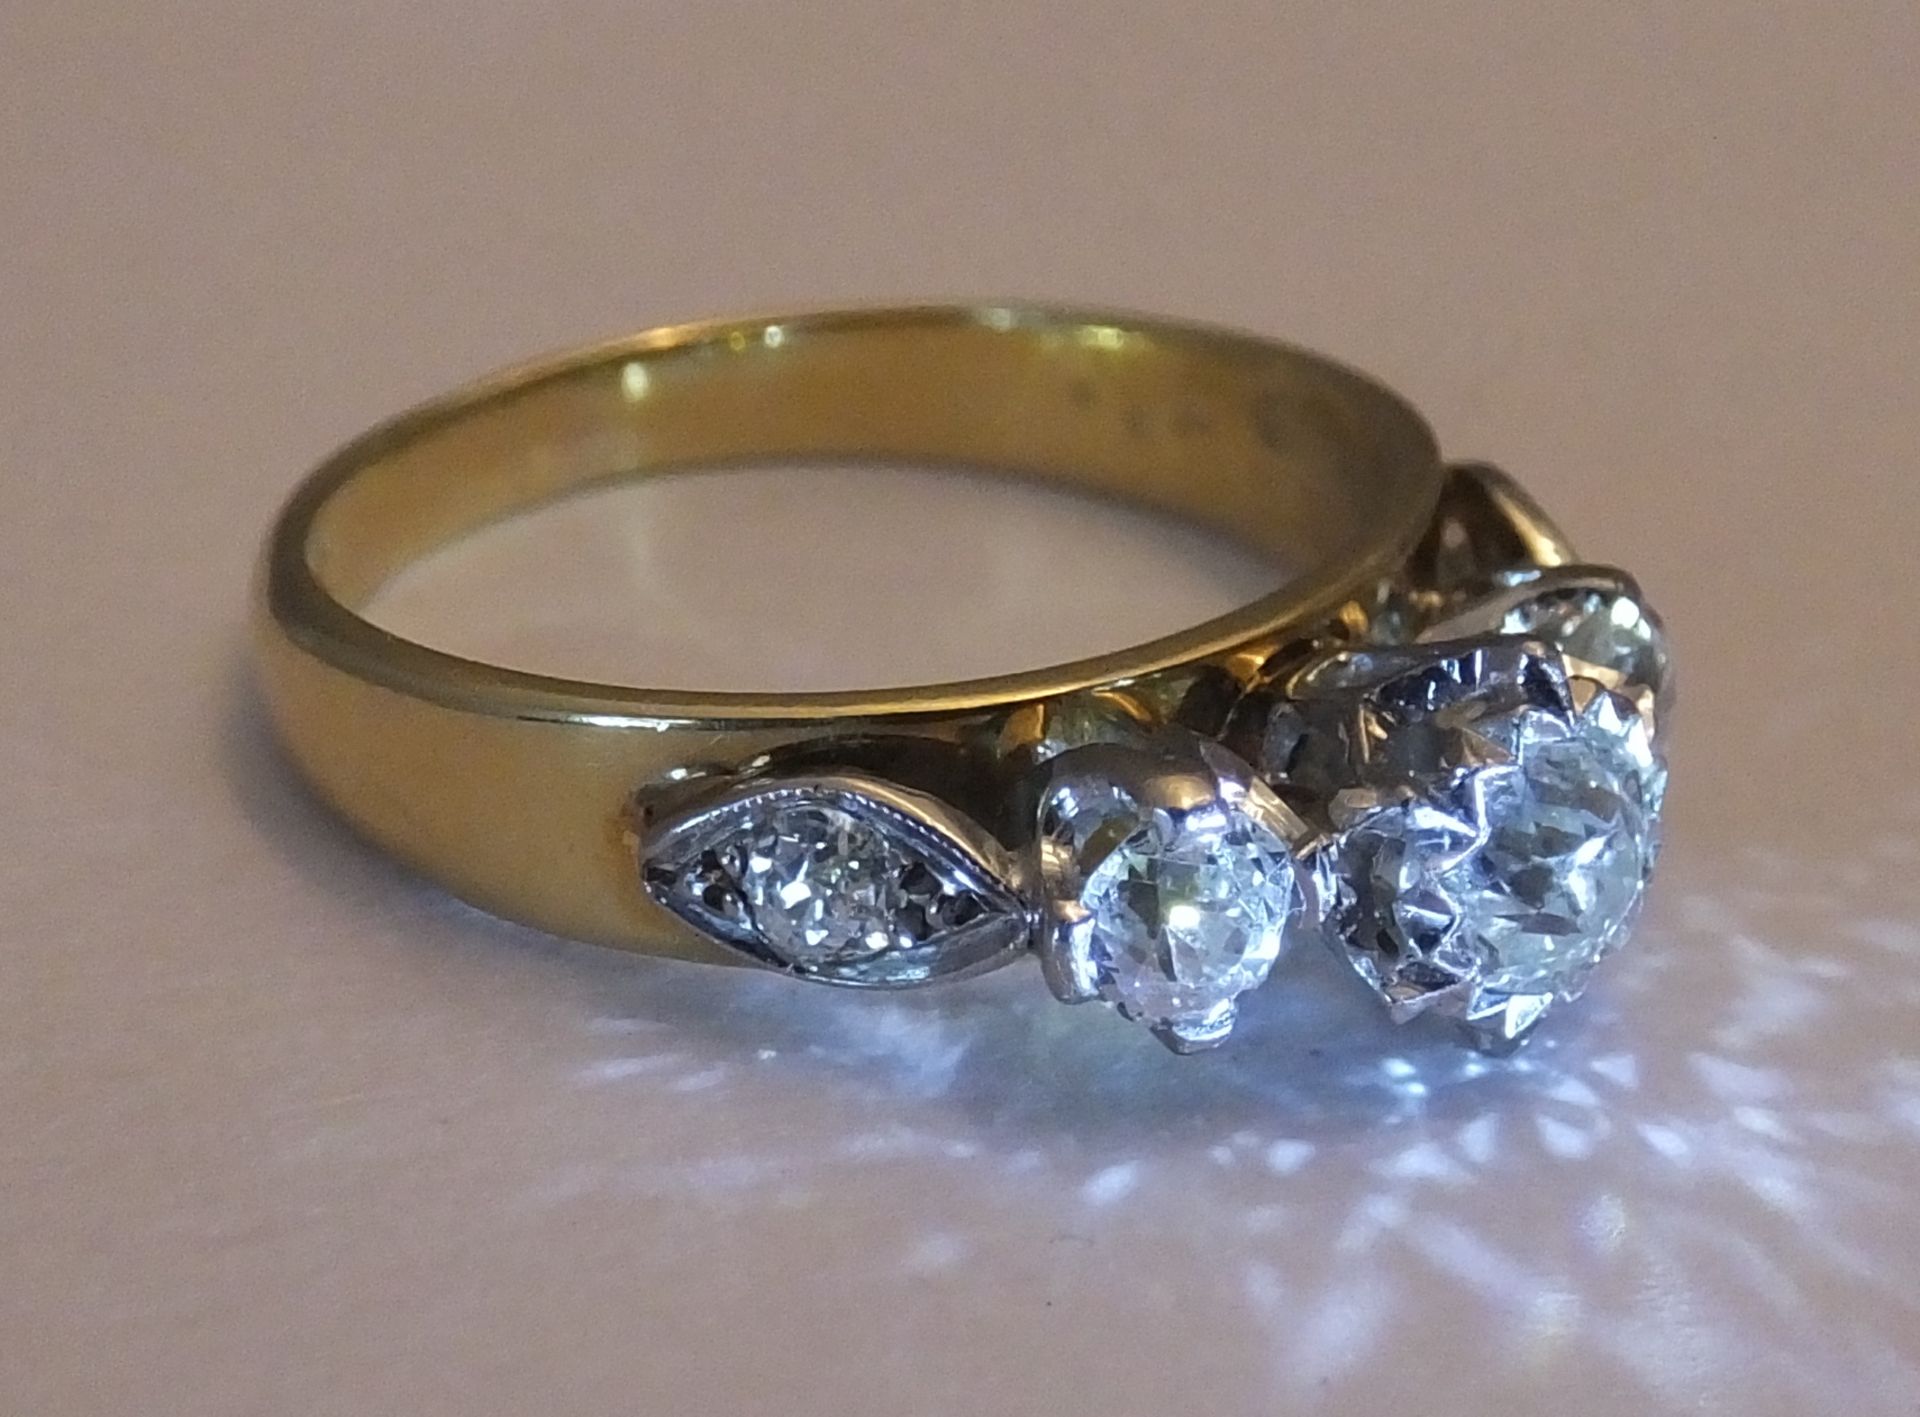 An 18ct Gold 5 stone ring. 1ct of old mine cut diamonds set in 18 carat gold - Image 2 of 3